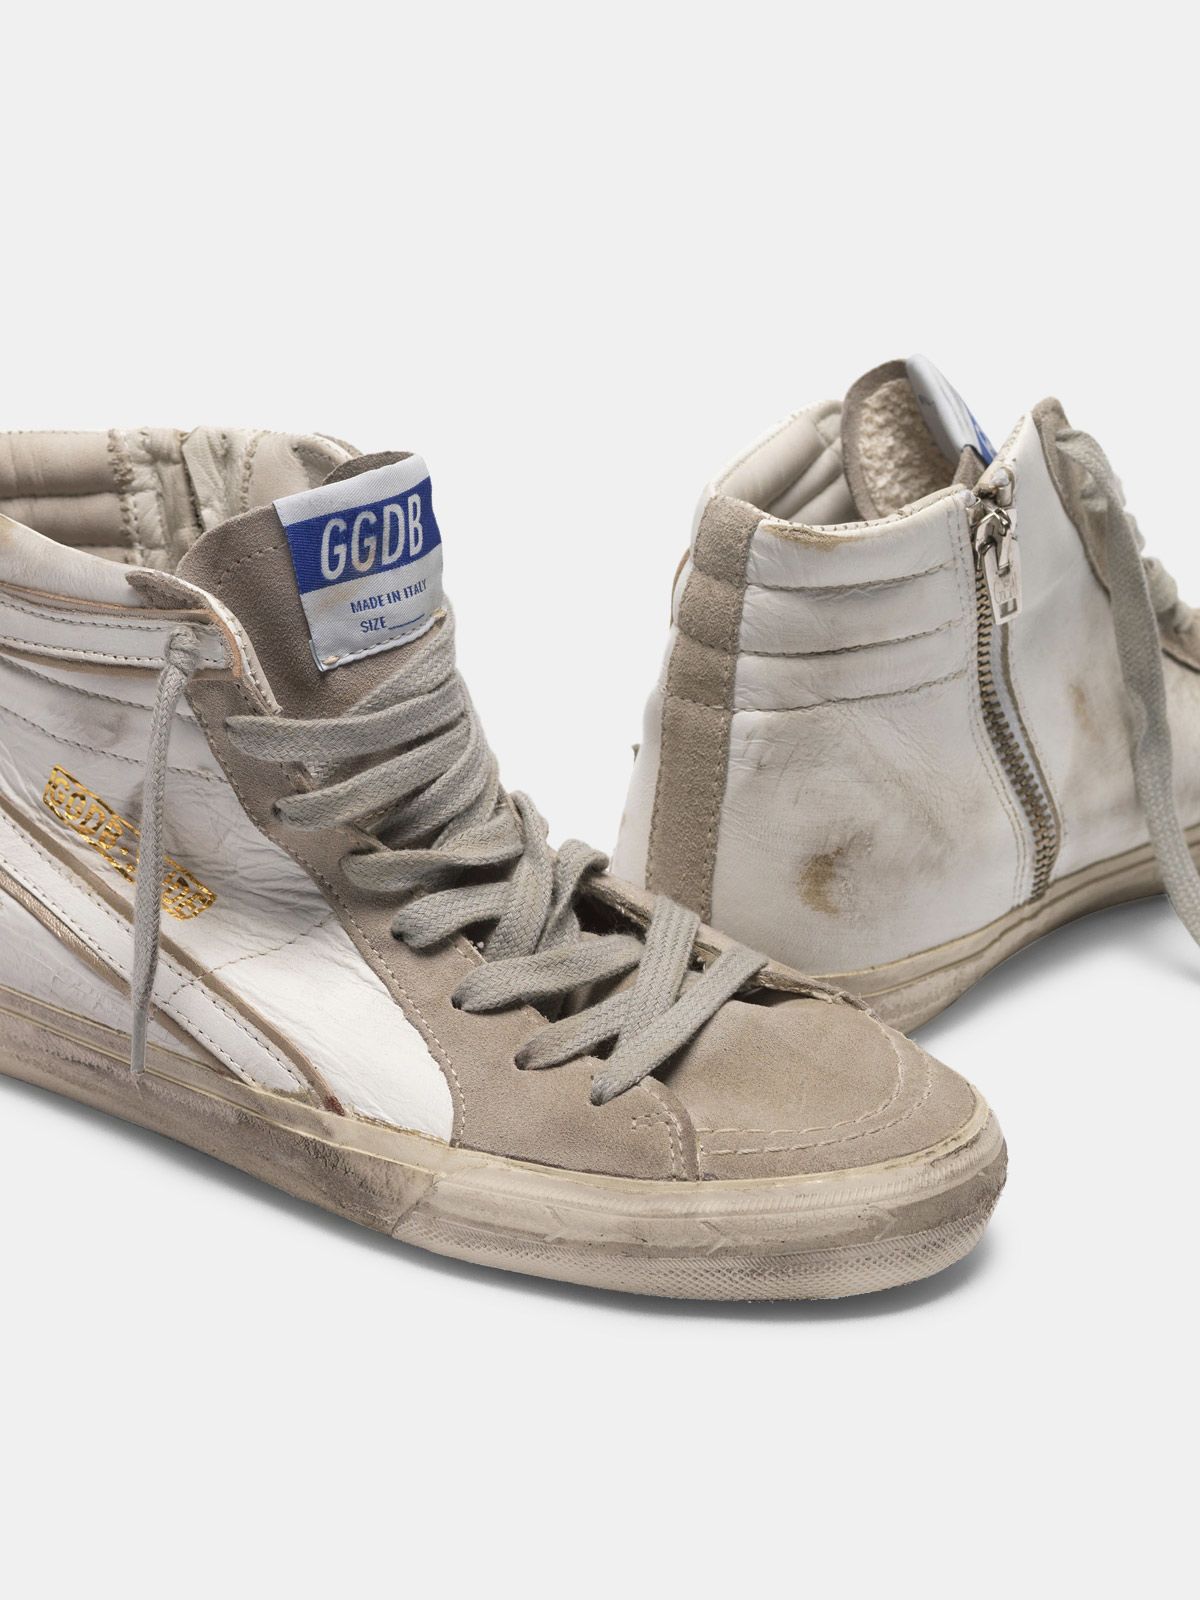 Slide sneakers in leather with suede star | Golden Goose